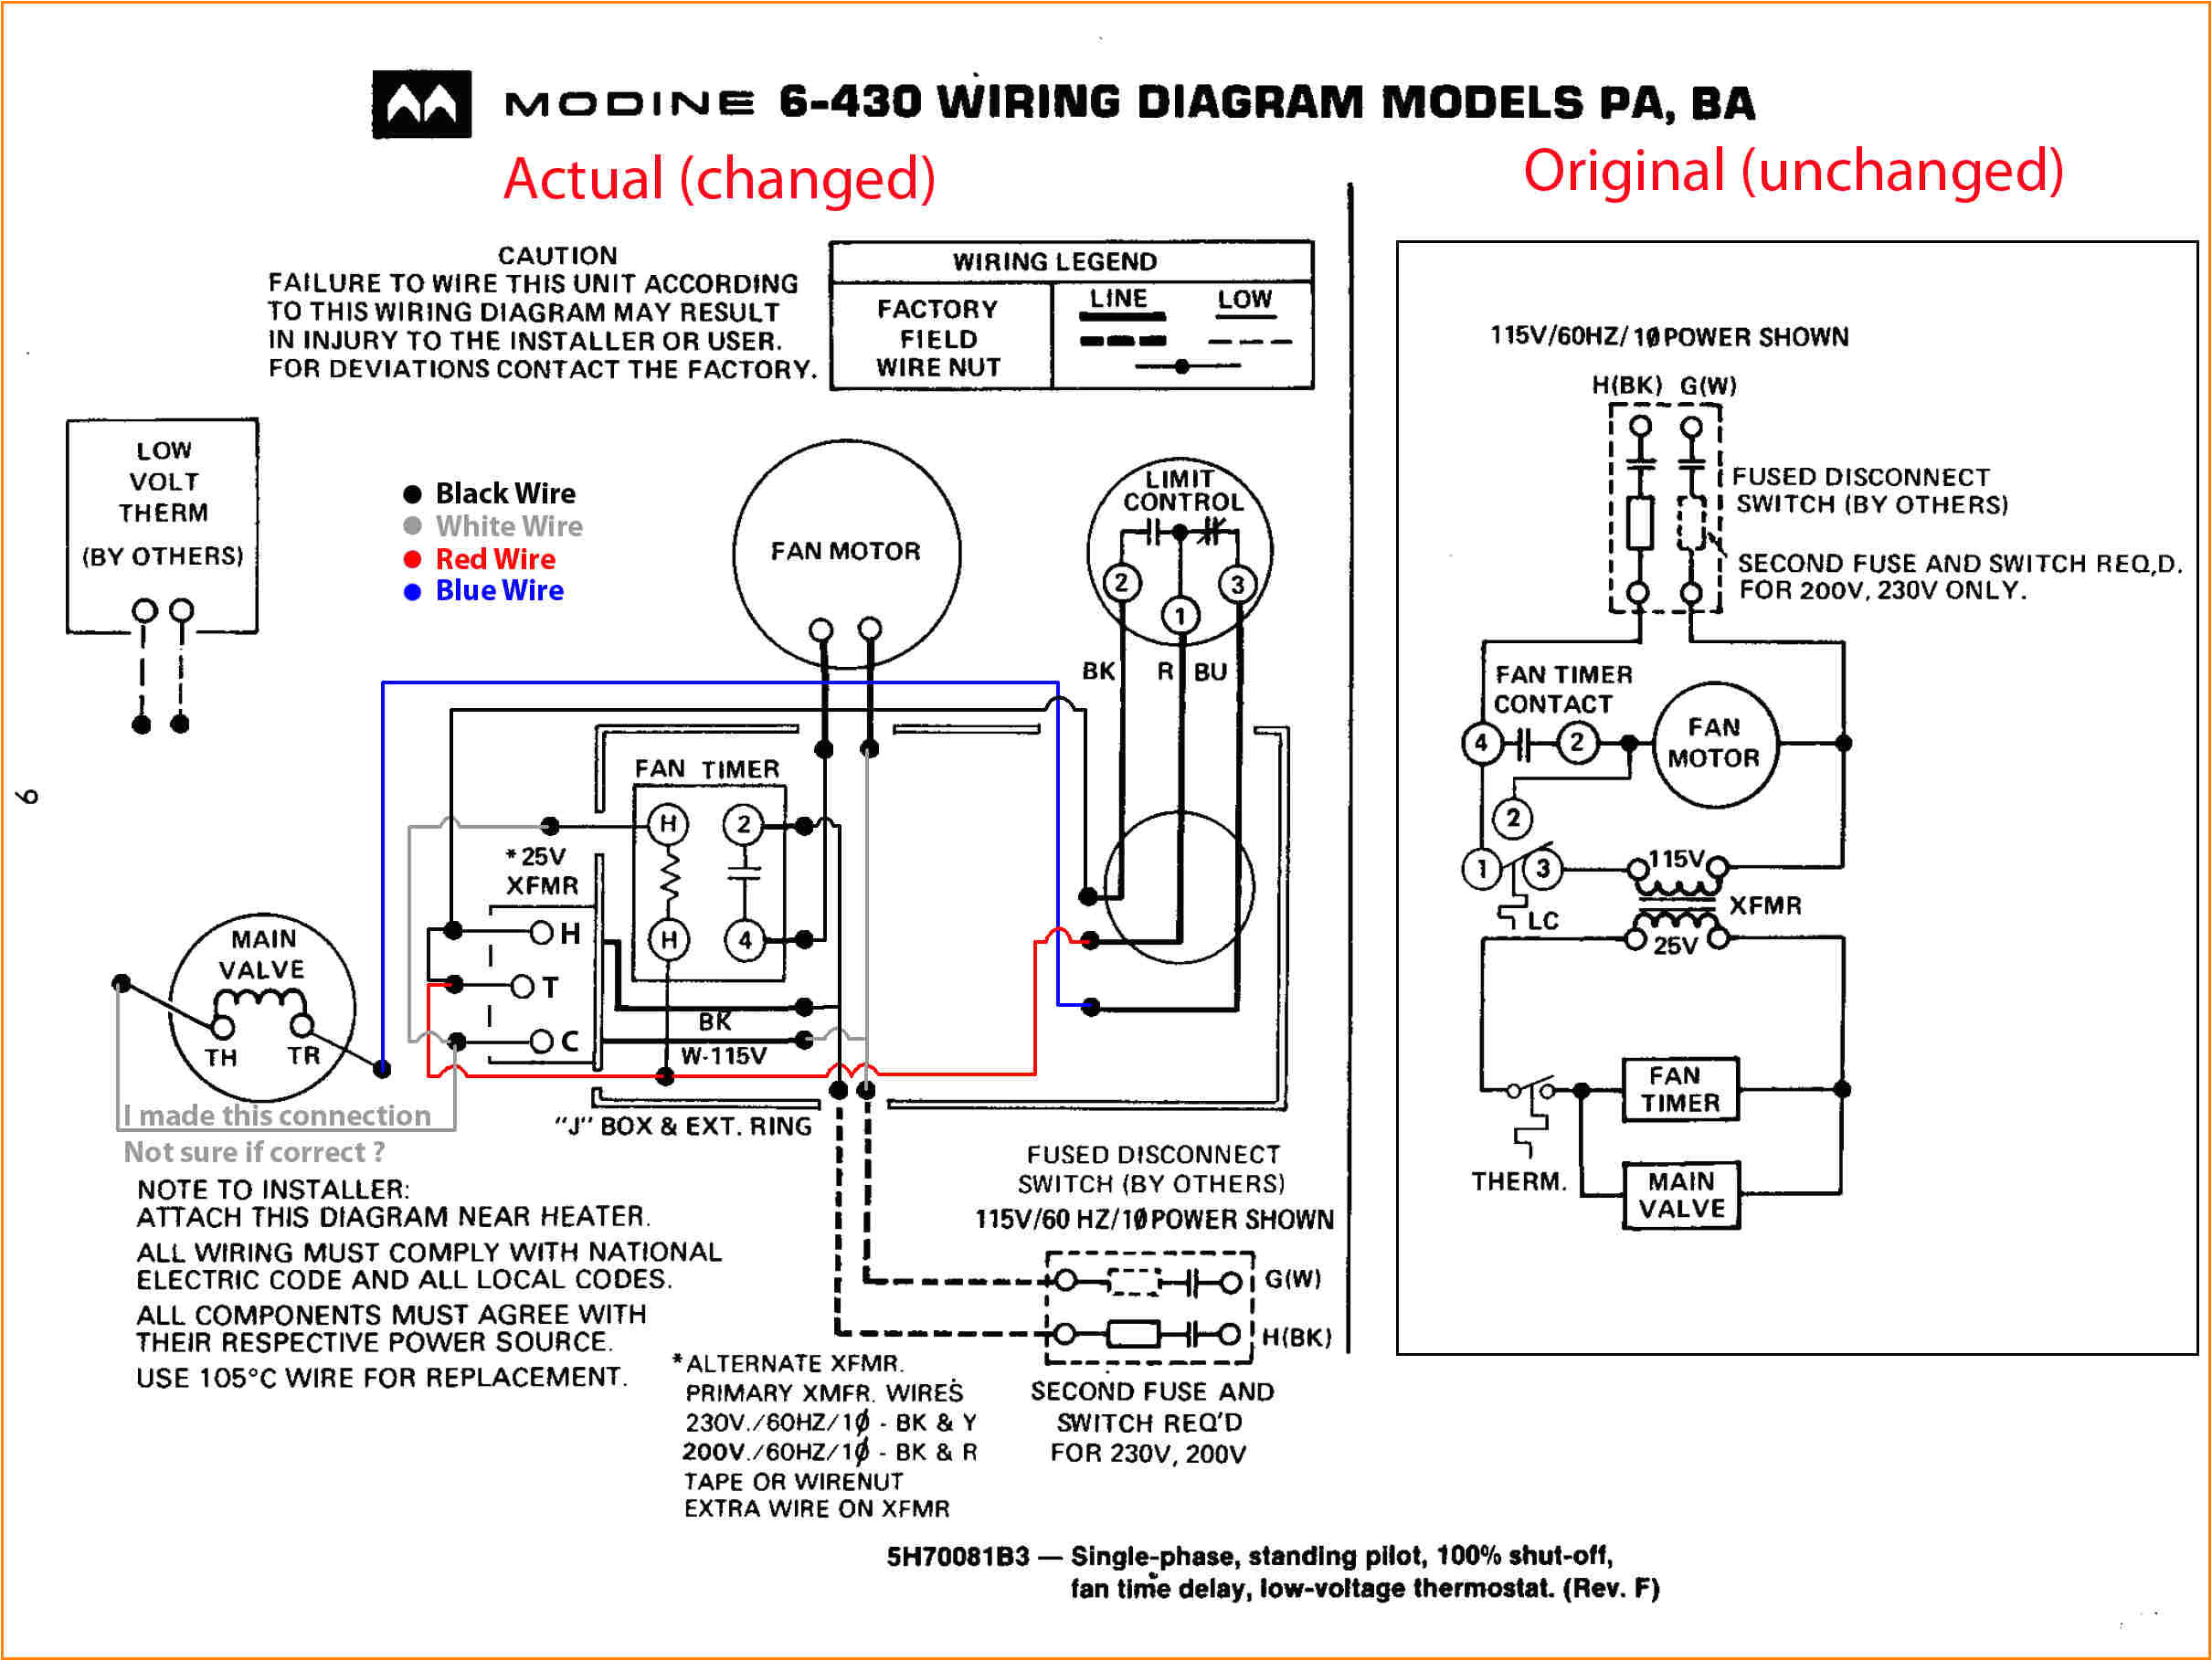 download example electric furnace fan relay wiring diagram jpg